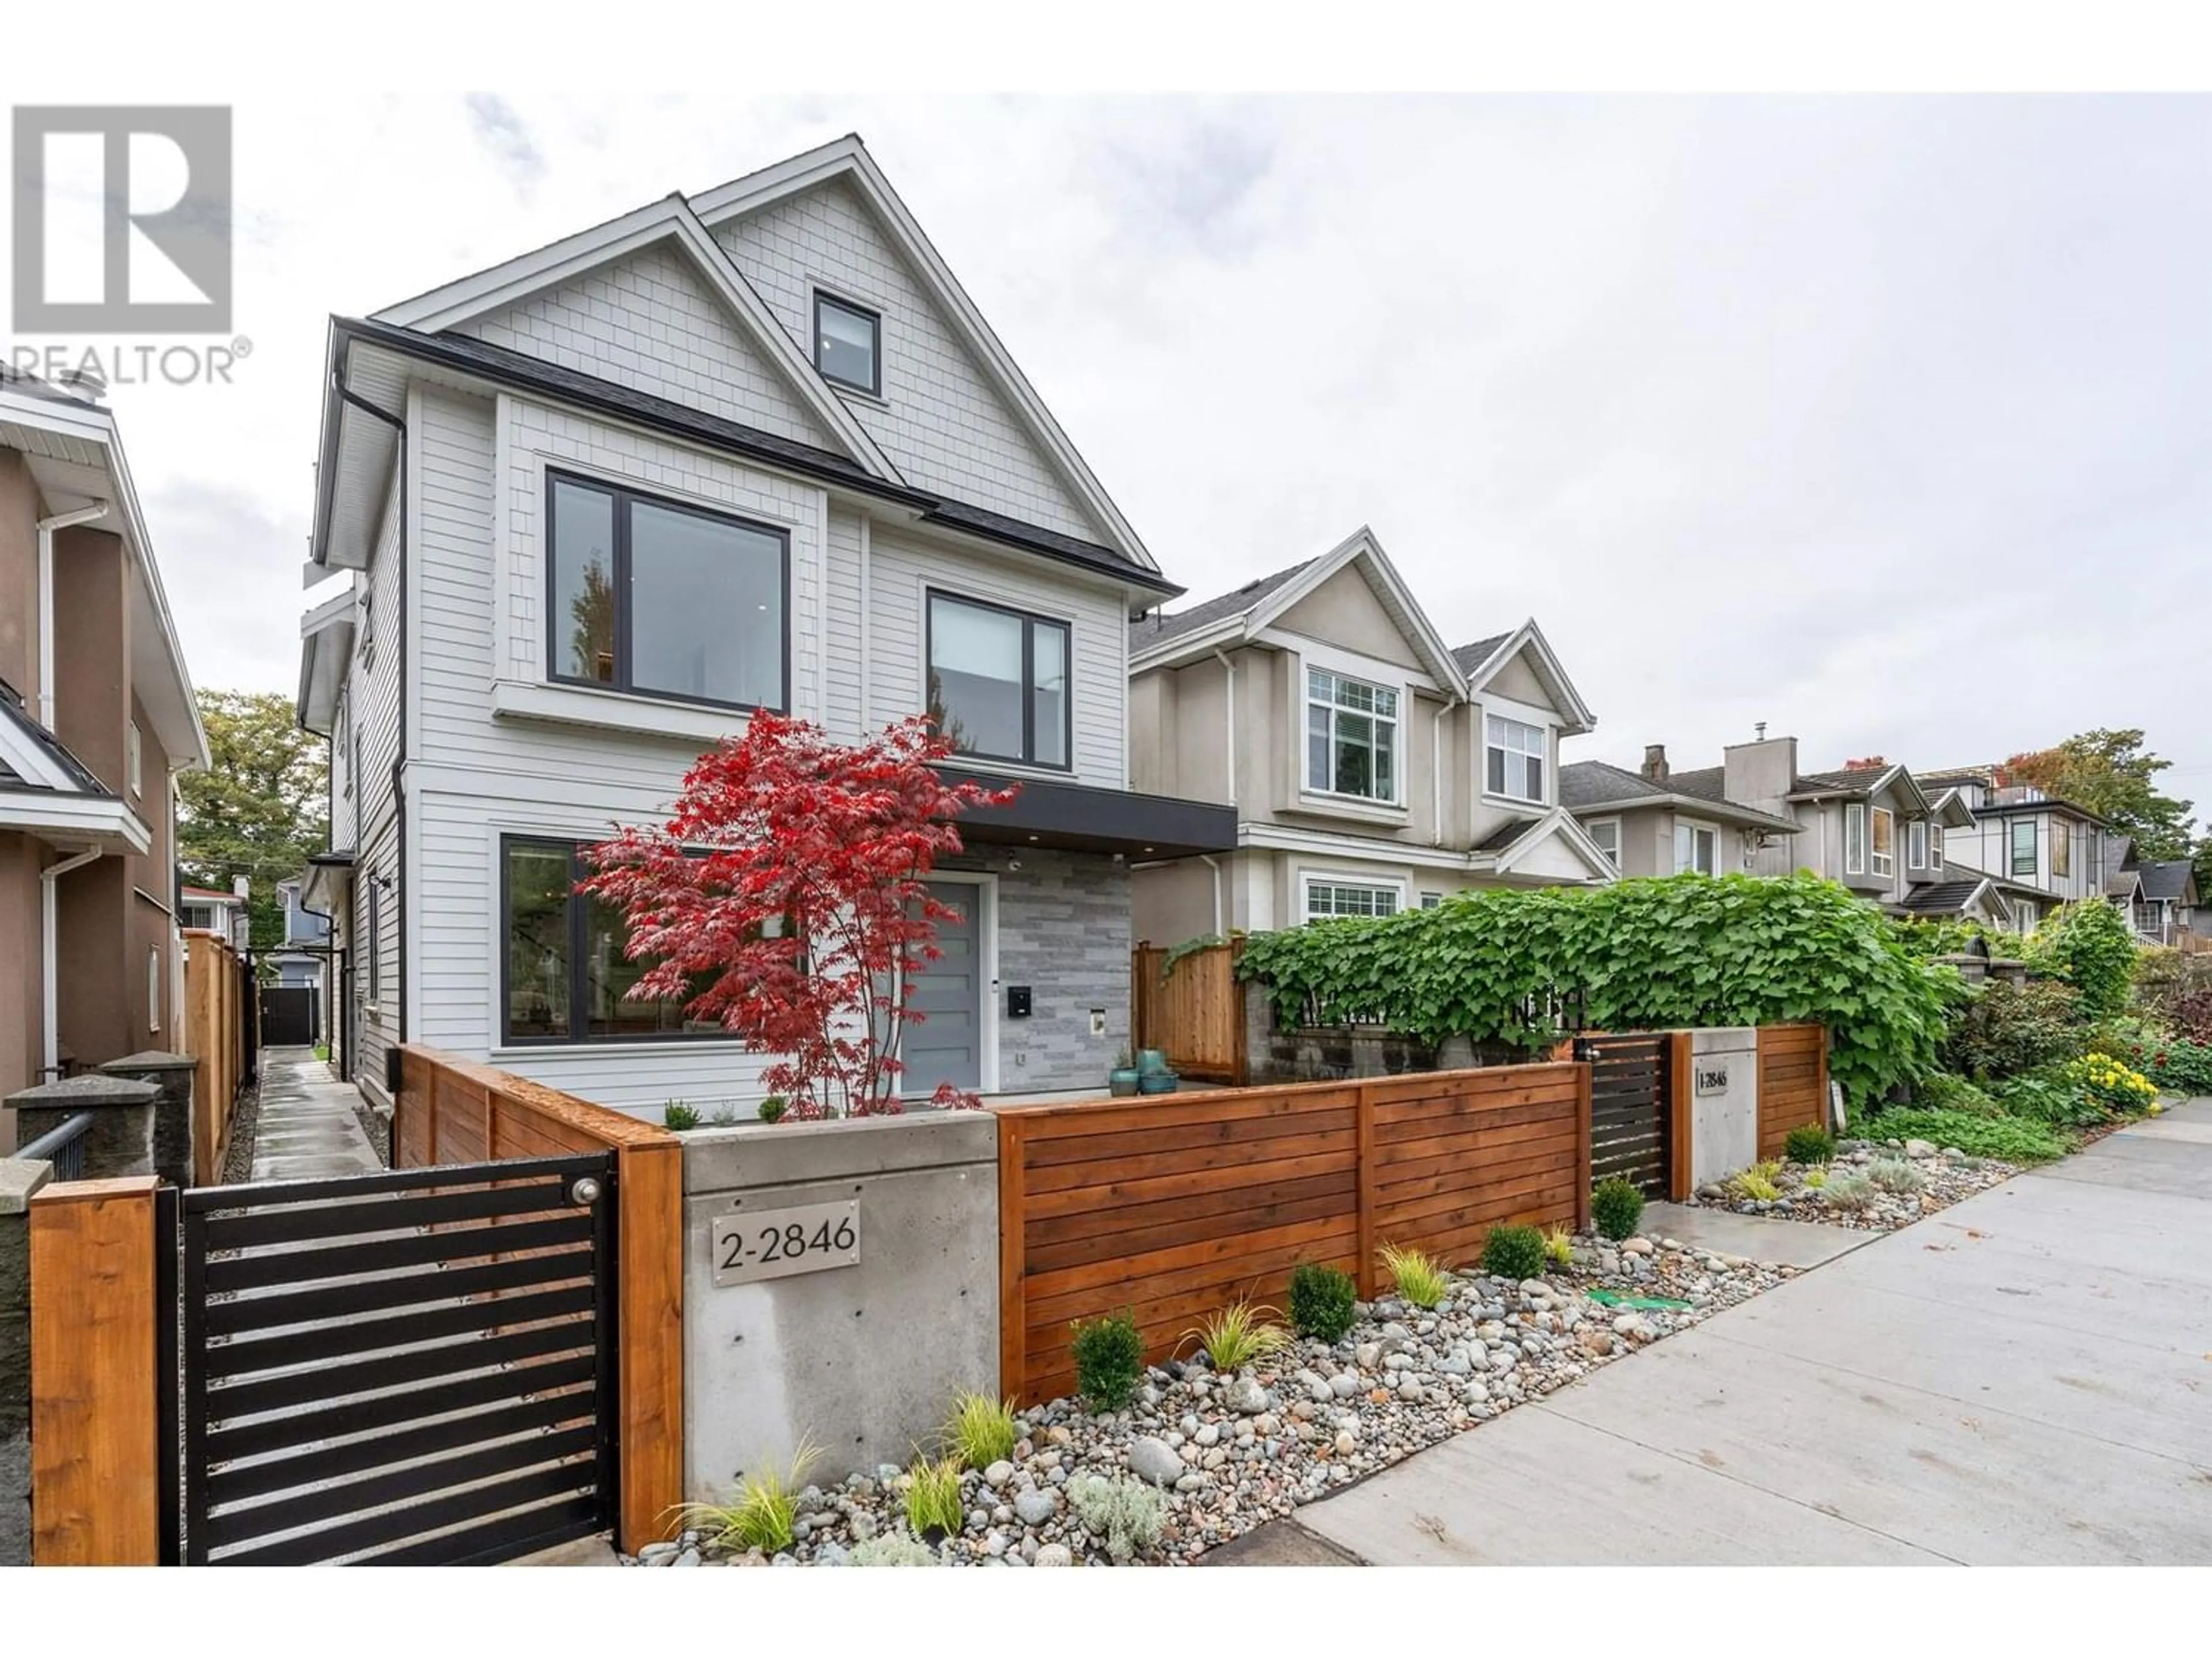 Frontside or backside of a home for 2 2846 MCGILL STREET, Vancouver British Columbia V5K1H6